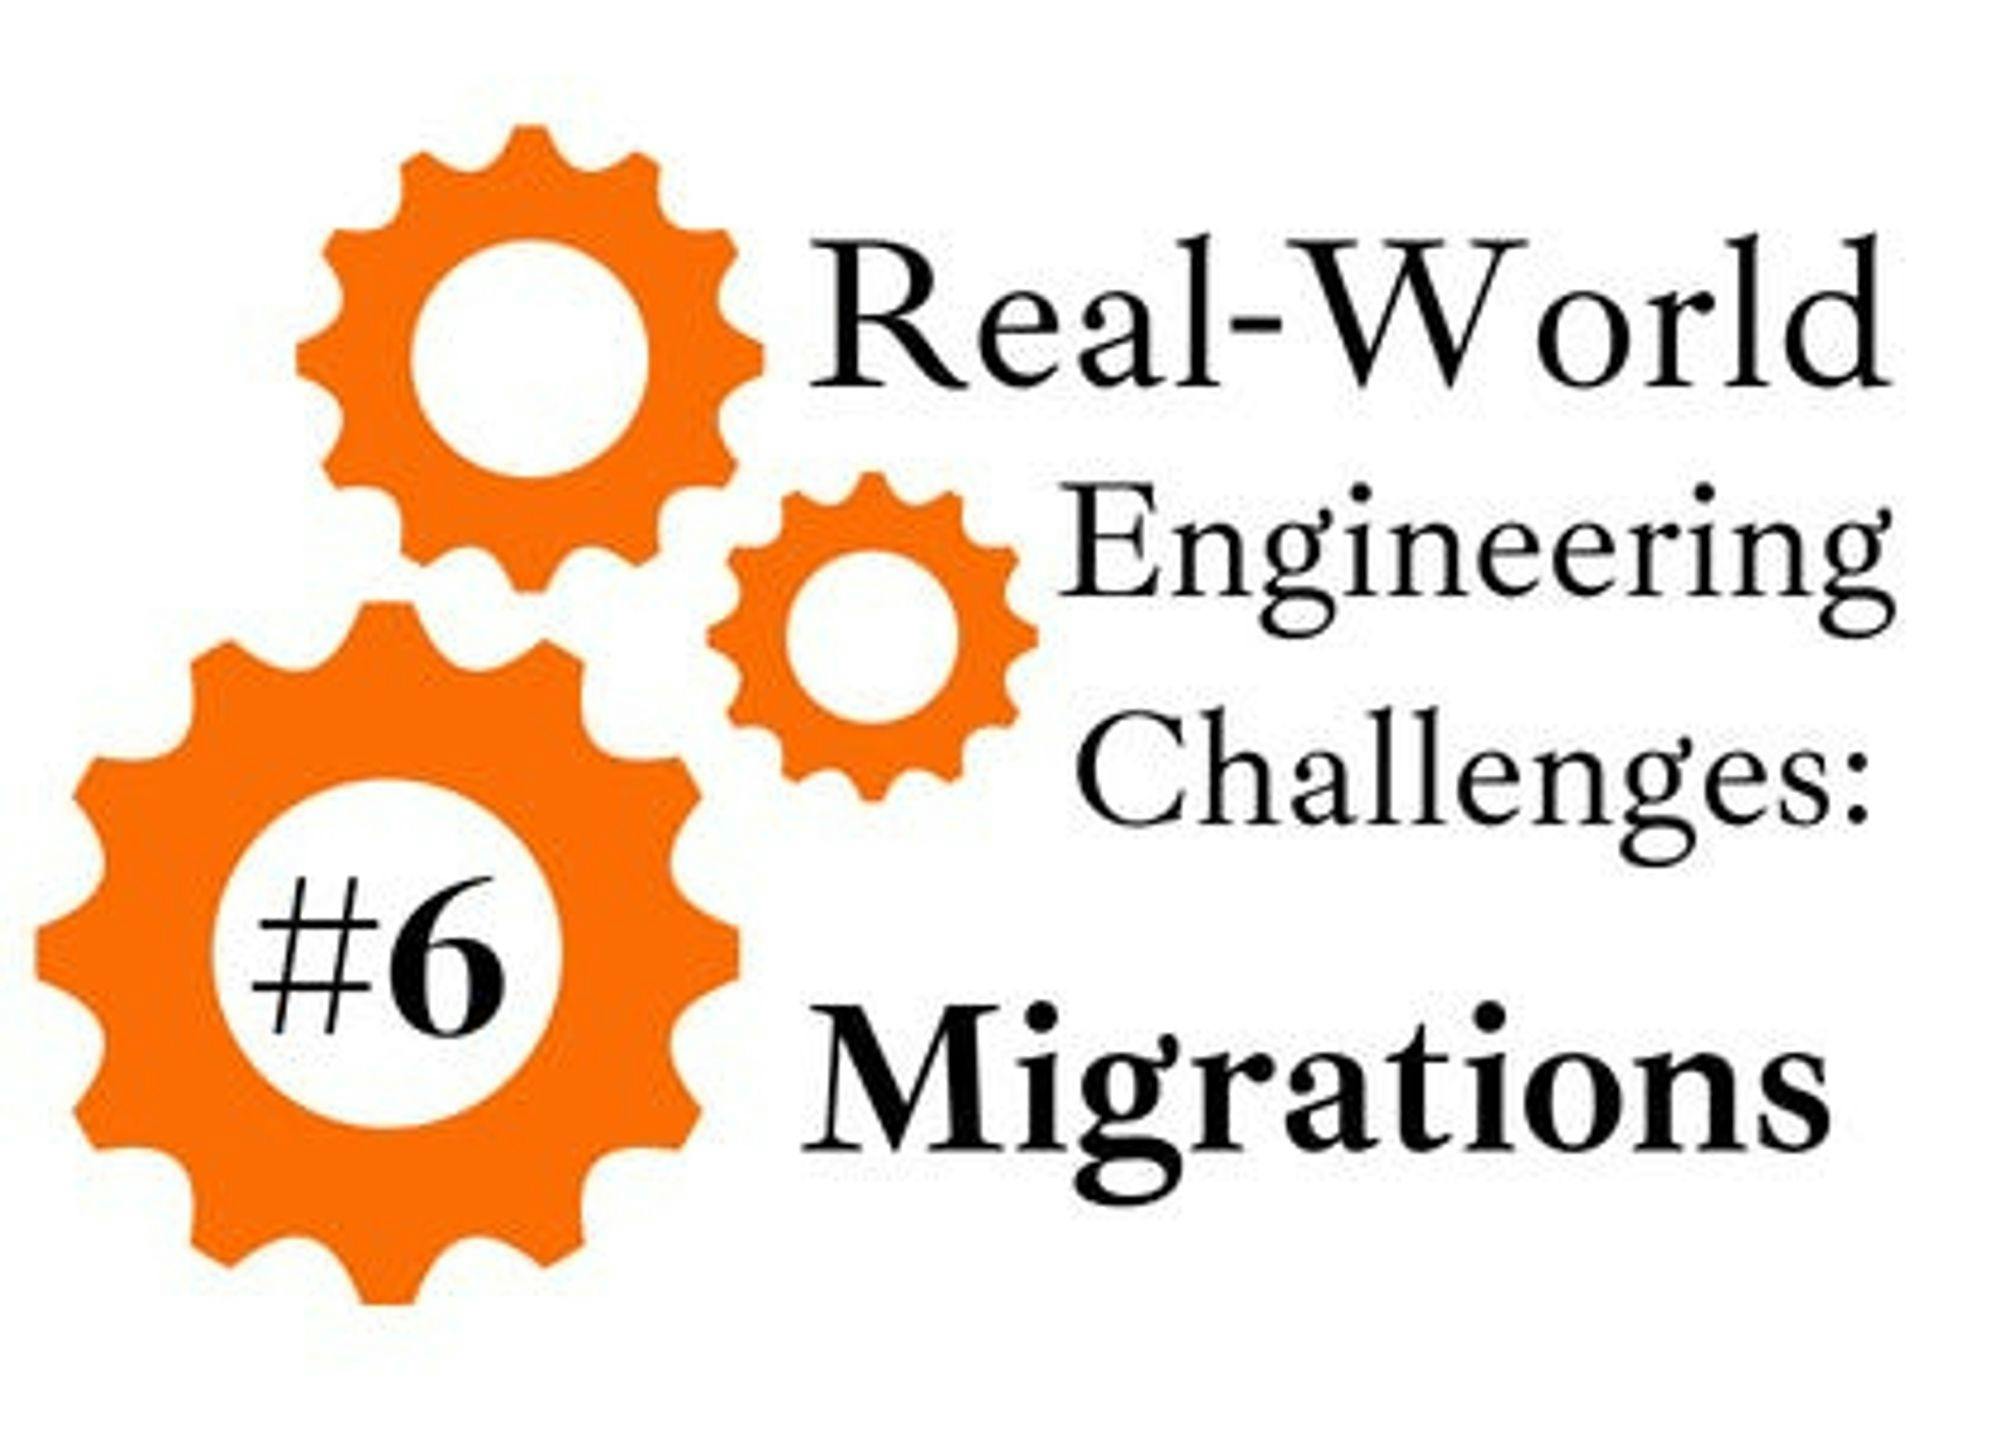 Real-World Engineering Challenges #6: Migrations